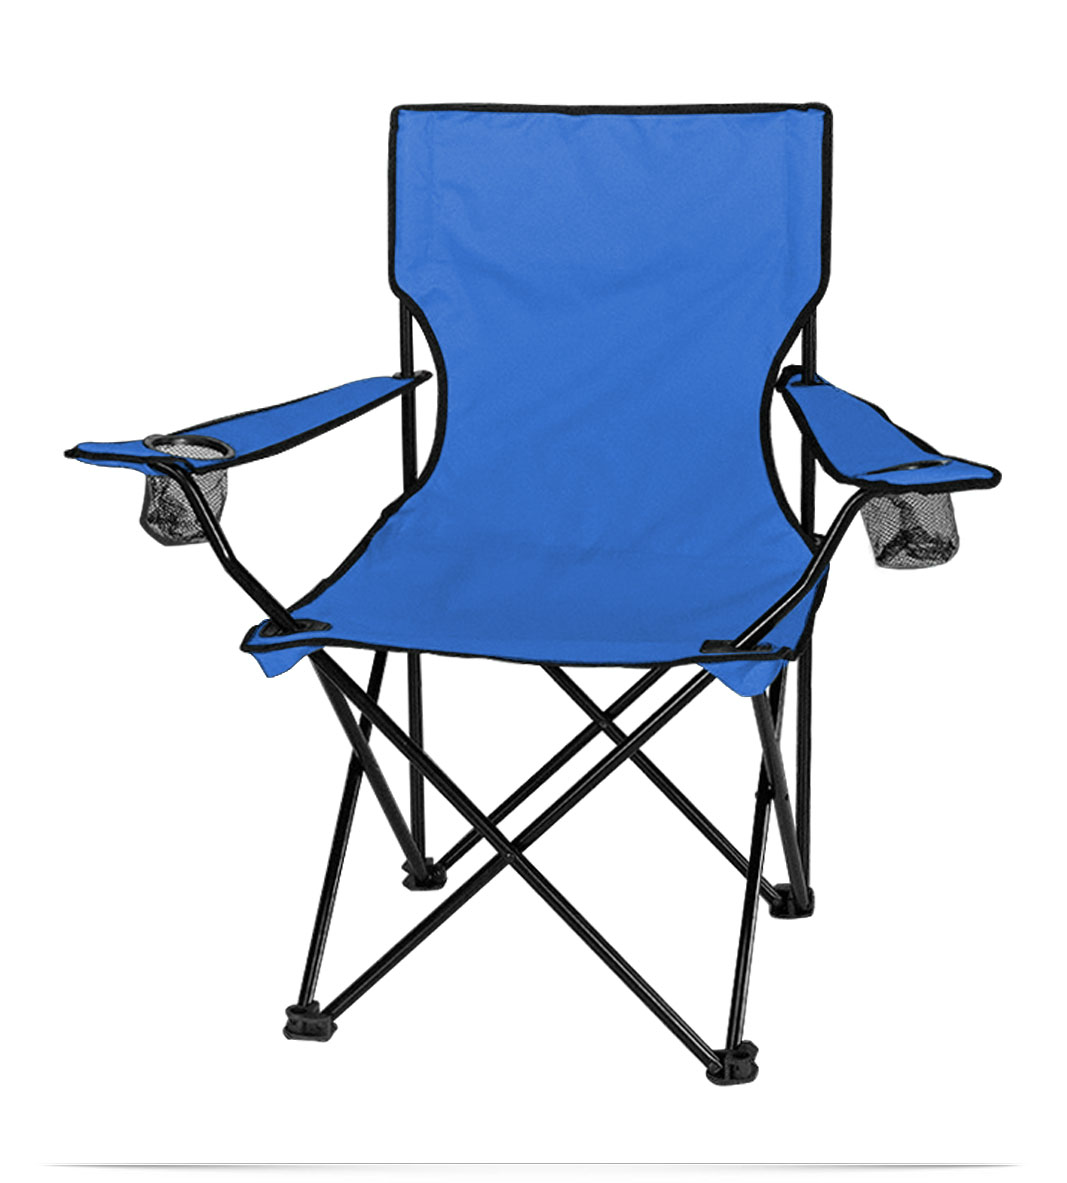 Camping chair-Home / Promotional items / Camping folding chairs GOFMYCD